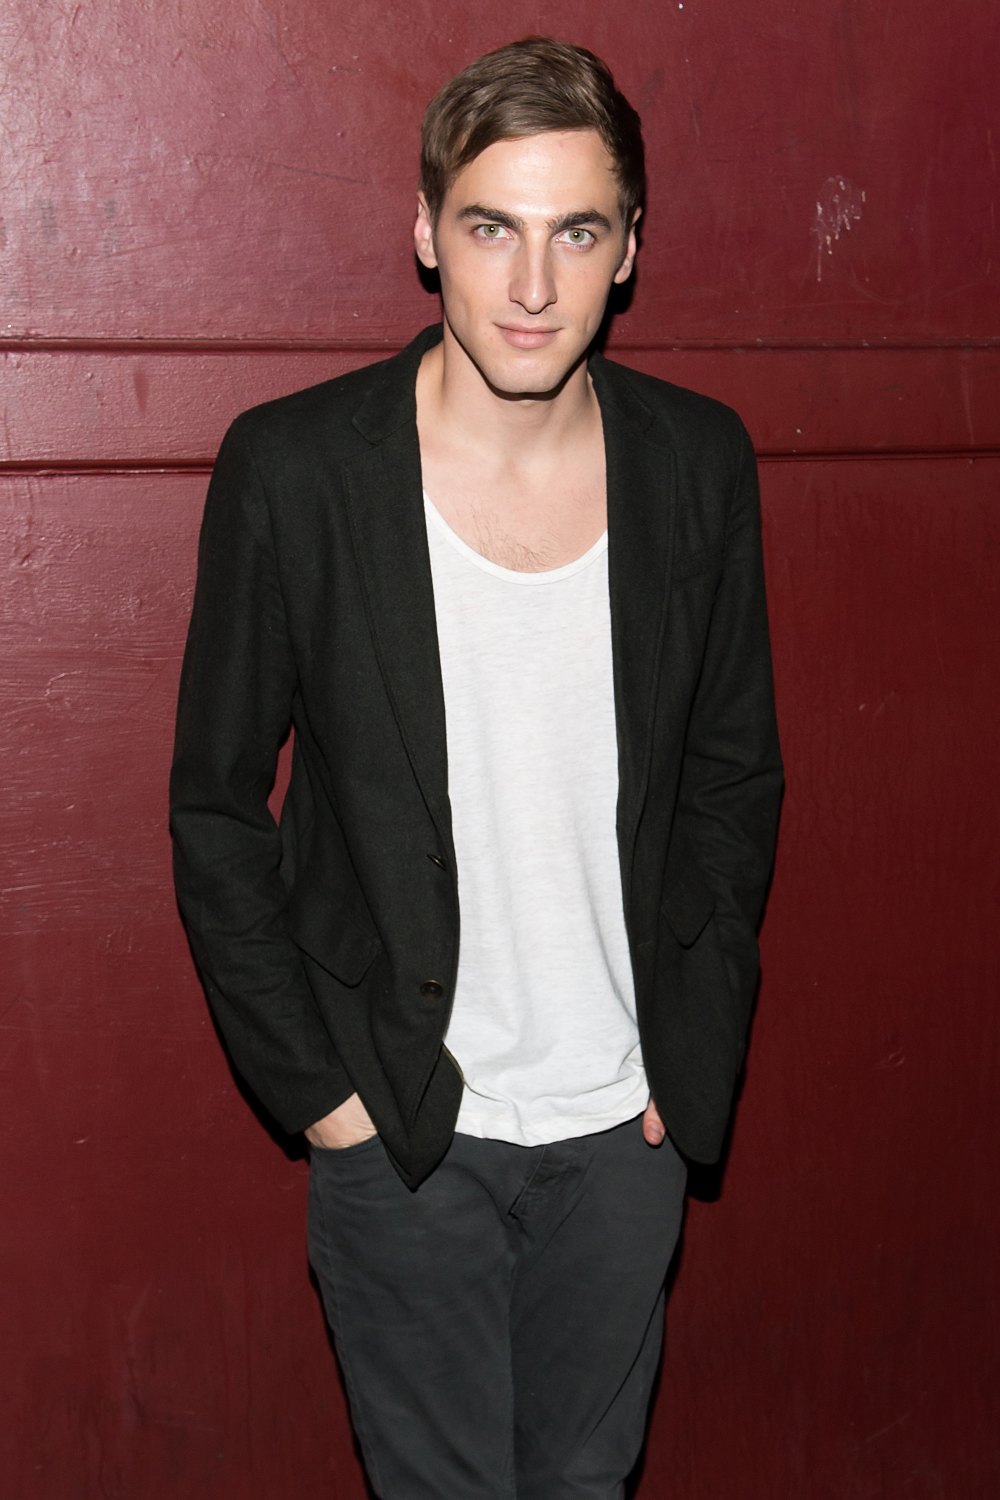 'Big Time Rush' Star Kendall Schmidt's Transformation in Photos | J-14